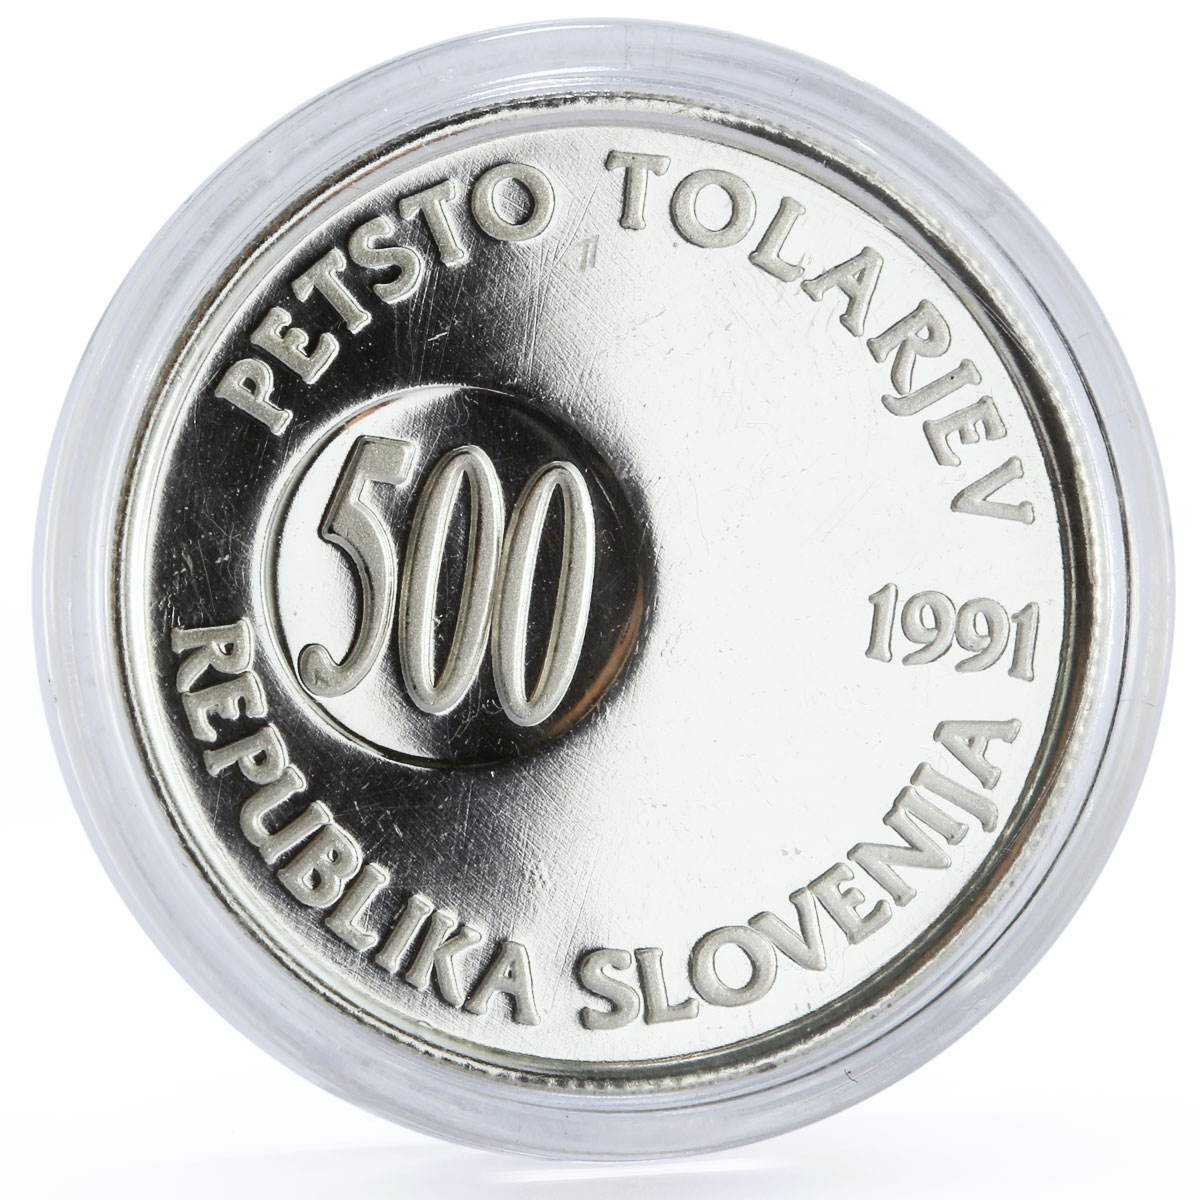 Slovenia 500 tolarjev The First Year of Independence silver coin 1991